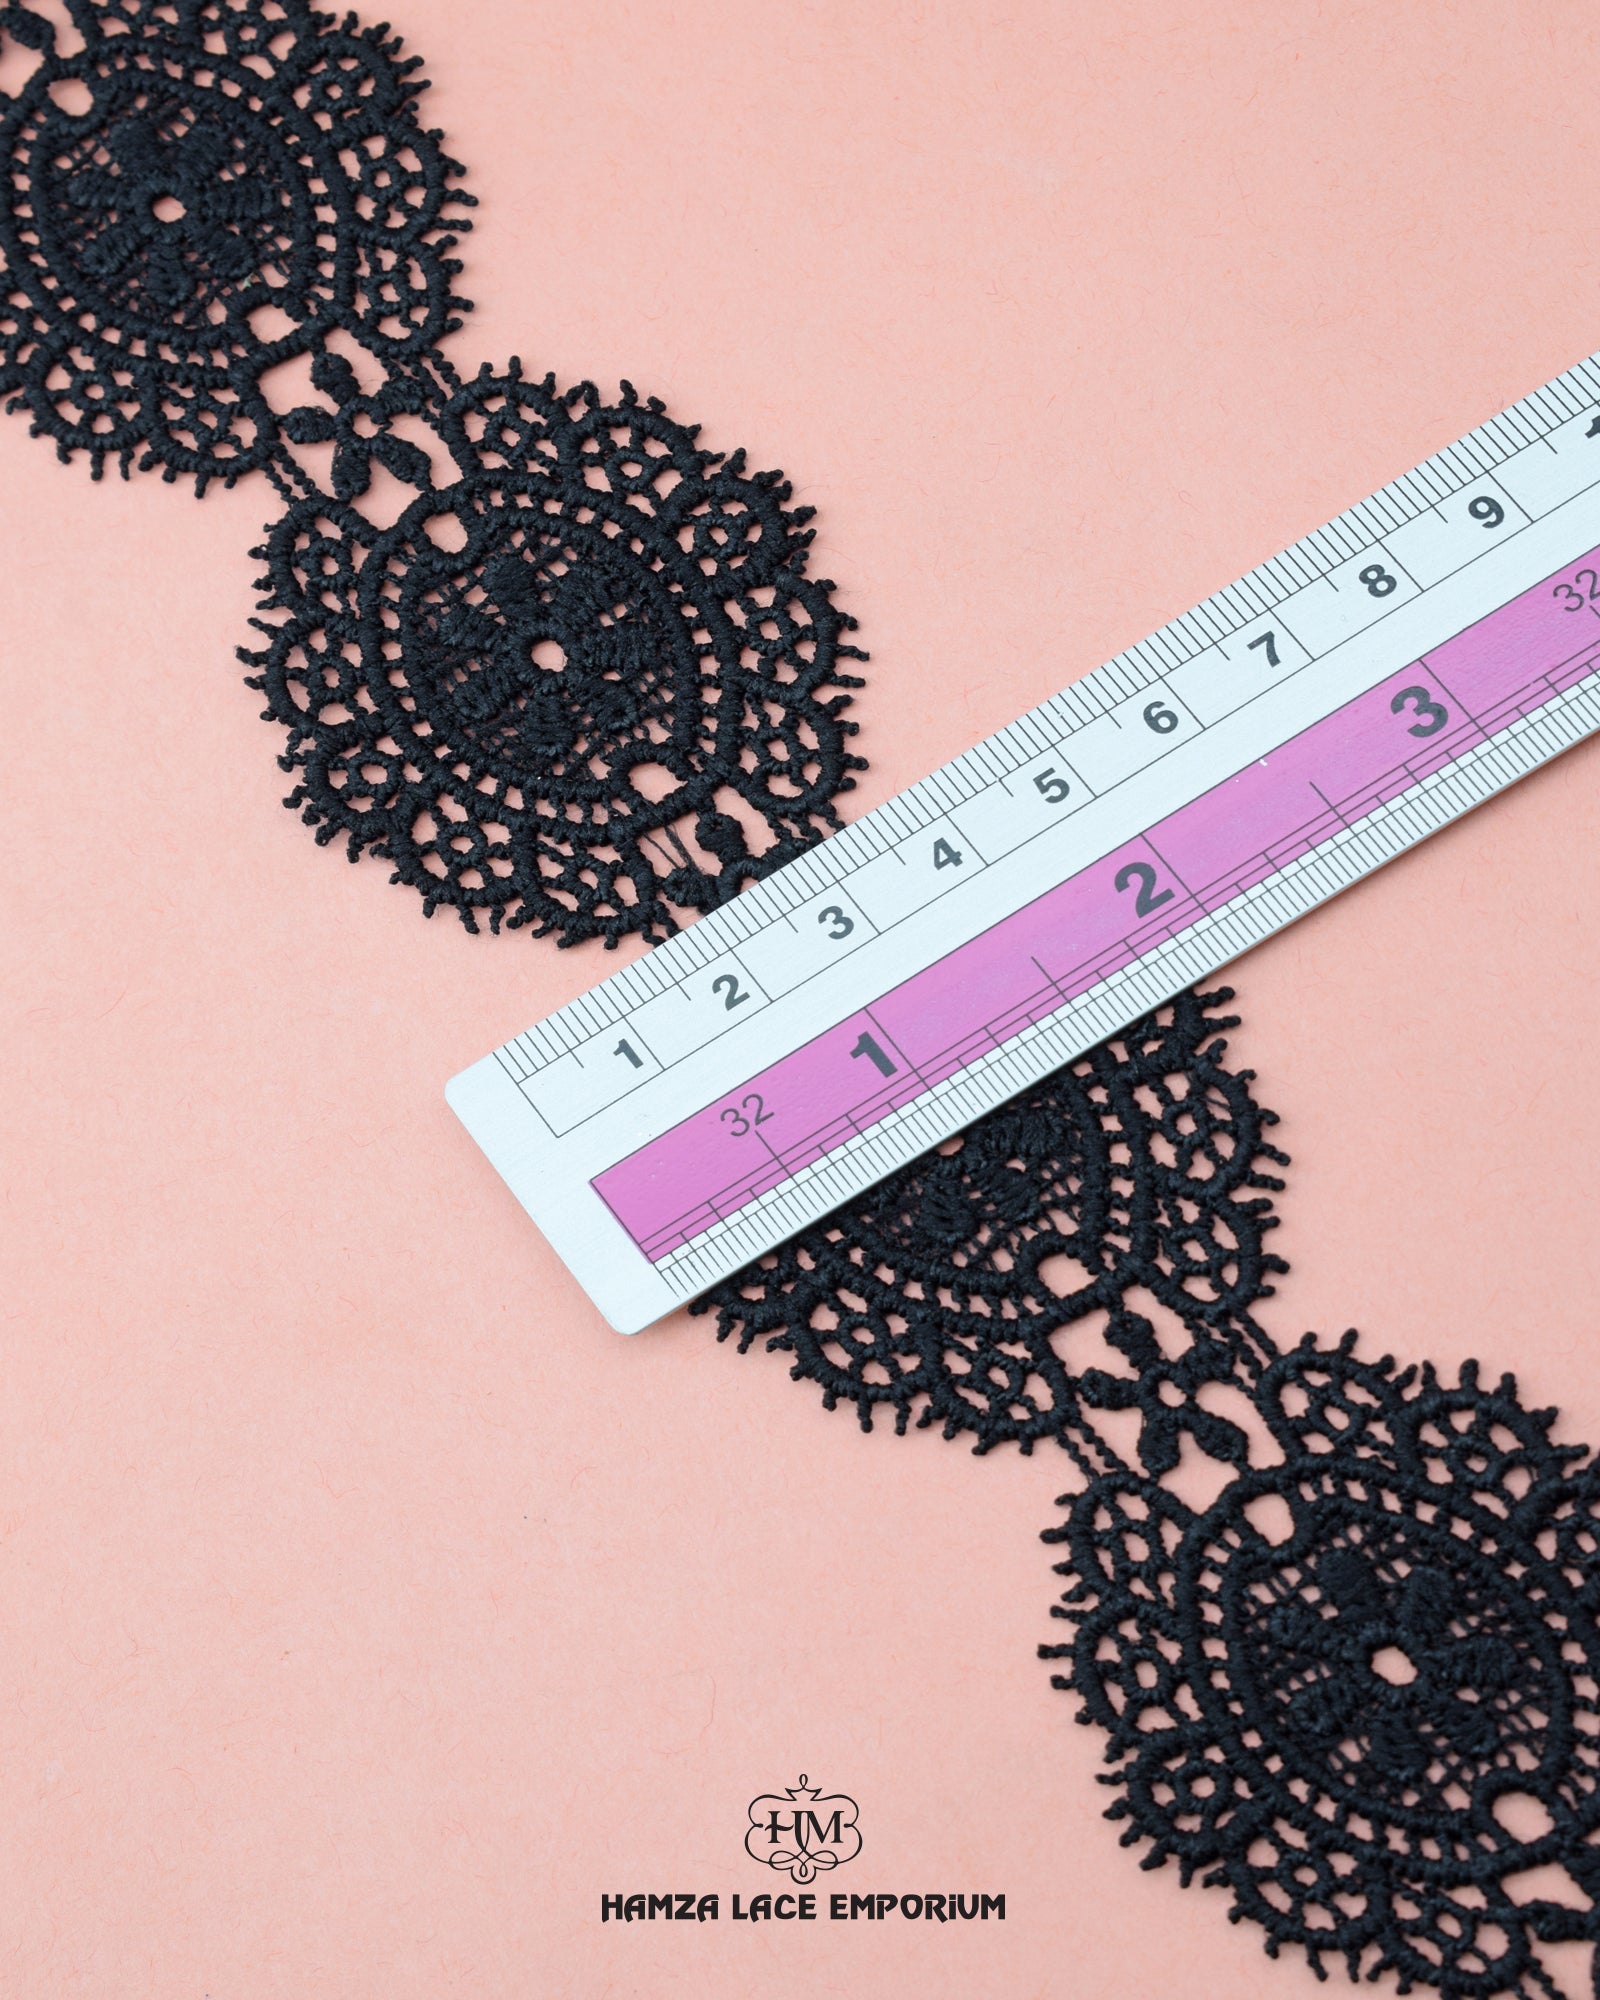 A ruler is showing the size of the 'Center Filling Lace 23611' as 2 inches